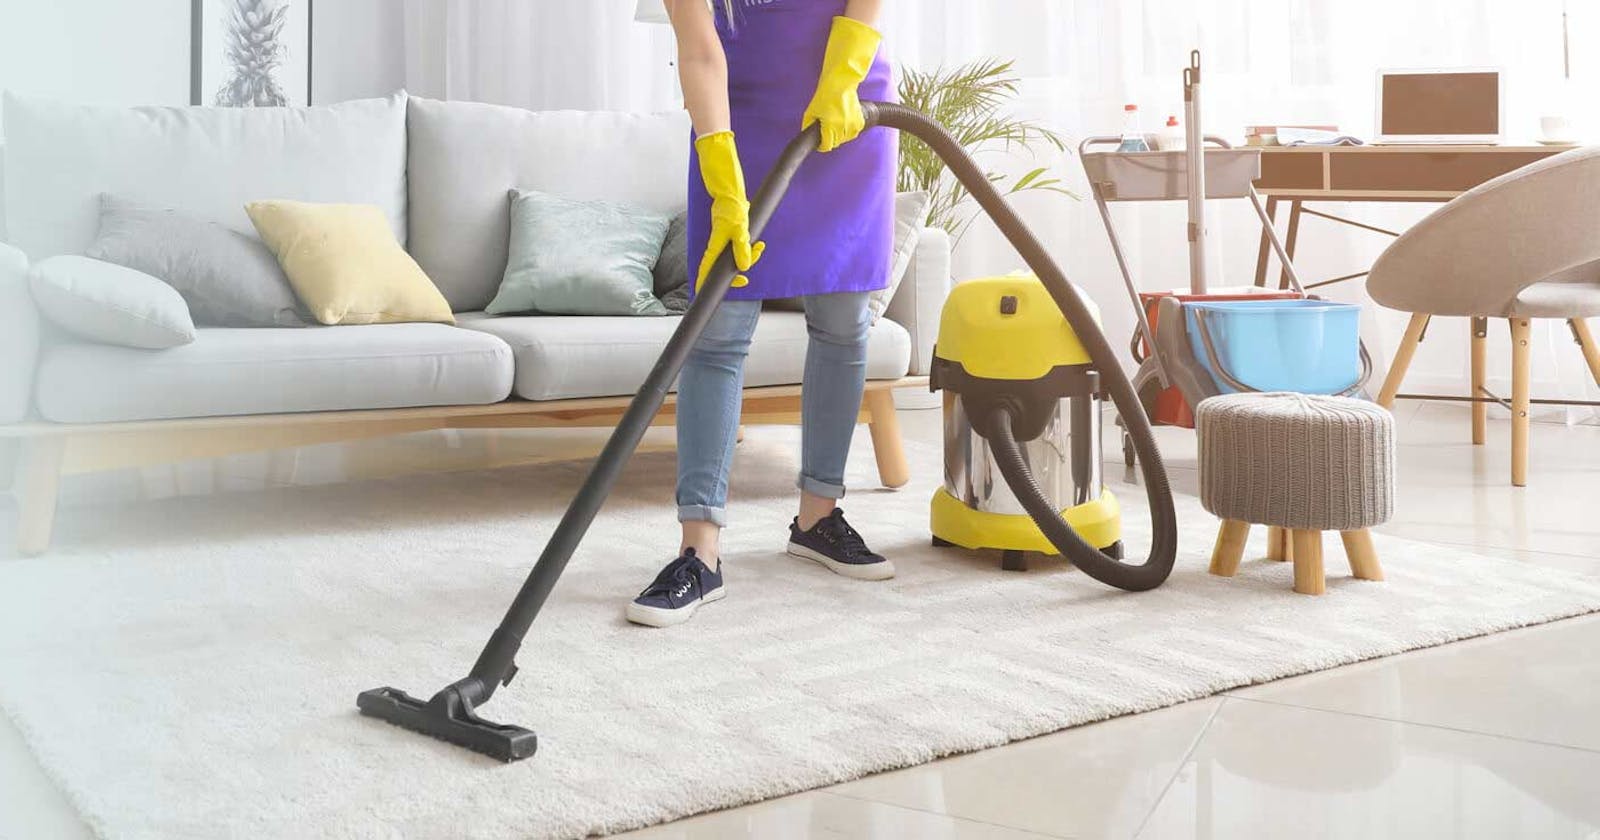 Six Things to Consider Before Hiring a House Cleaning Service